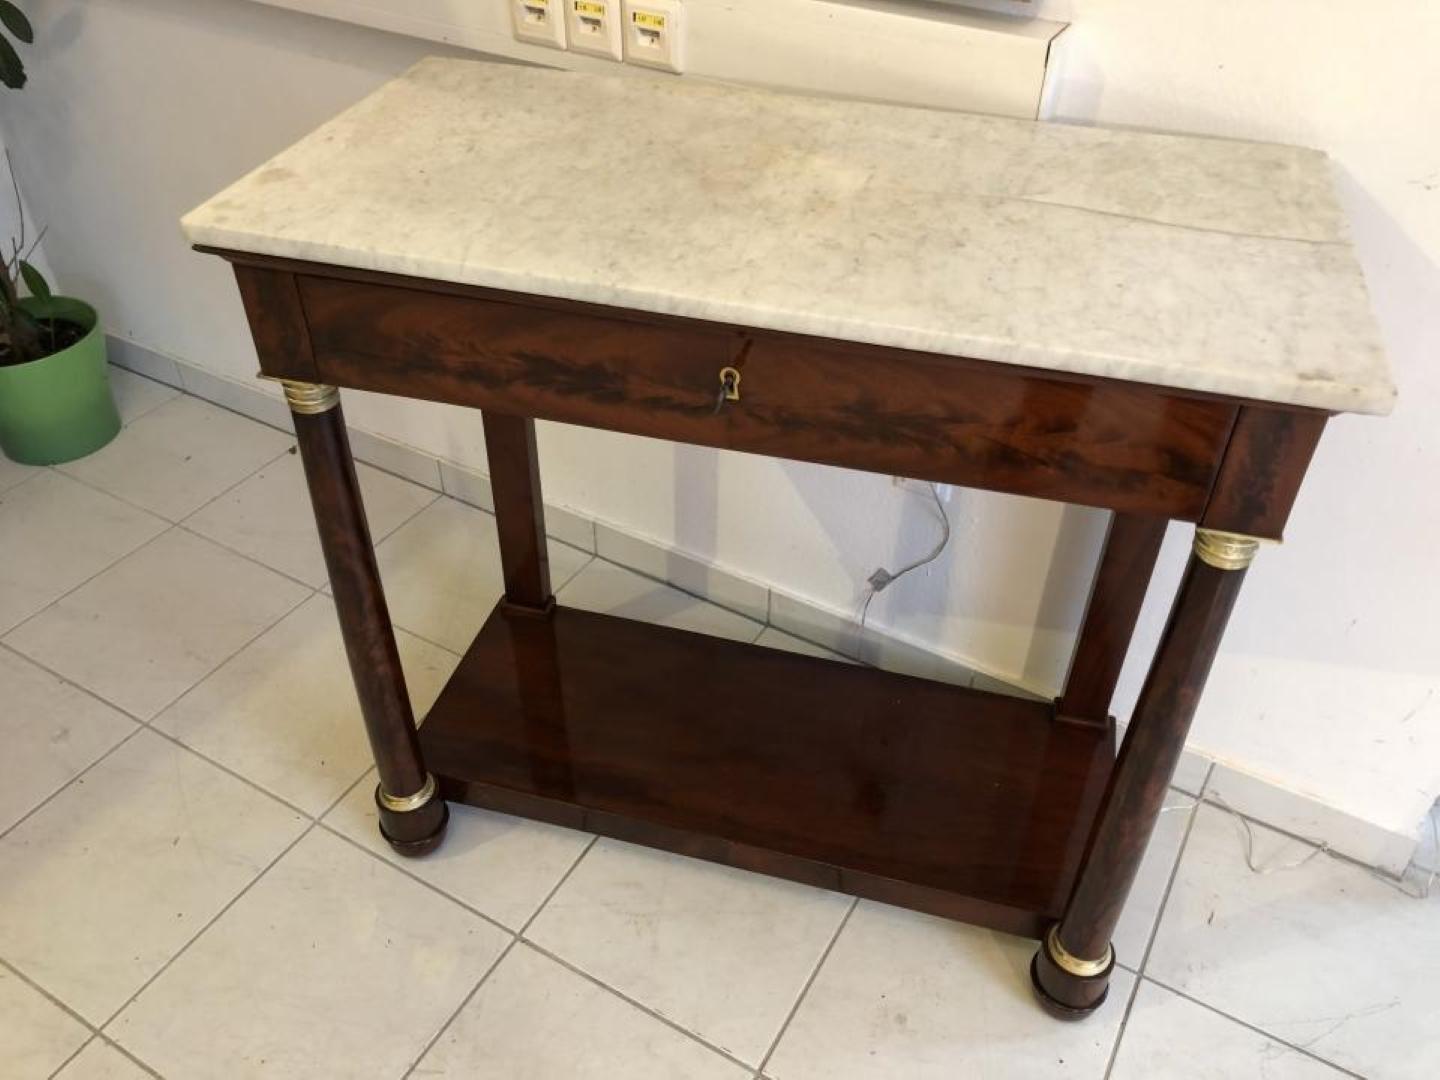 Original restored Empire console table from around 1800, restored to a perfect condition. 
Offers a stunning walnut wood build and perfect handcrafted quality.
This is a beautiful piece of nutwood, finished with shellac lacquer. Also features the